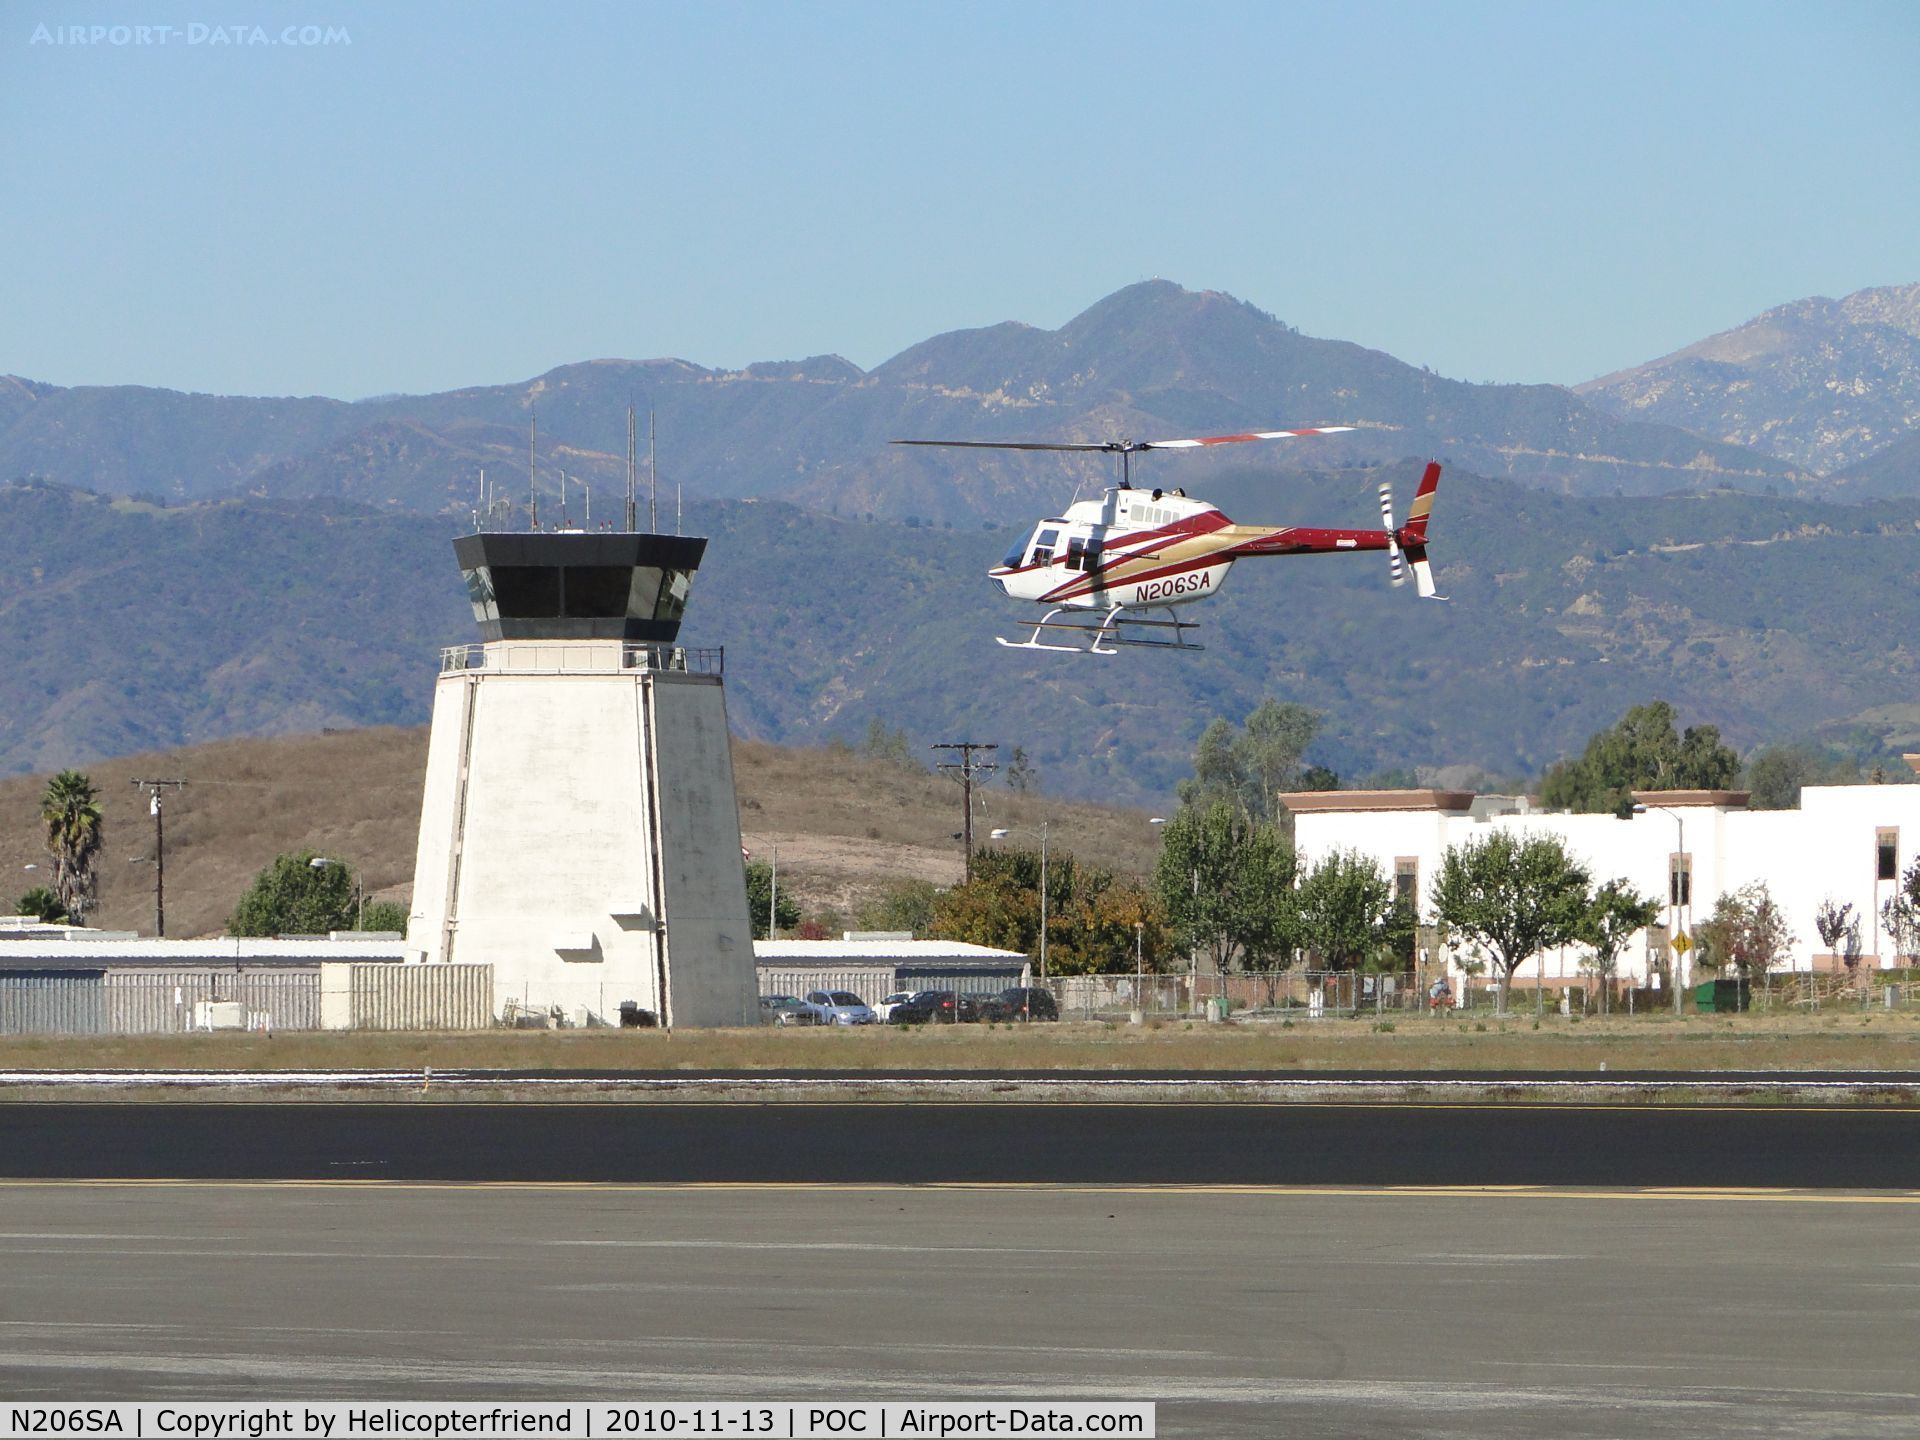 N206SA, 1973 Bell 206B JetRanger II C/N 1013, Practicing approaches, hovering and here is taking off and heading westbound